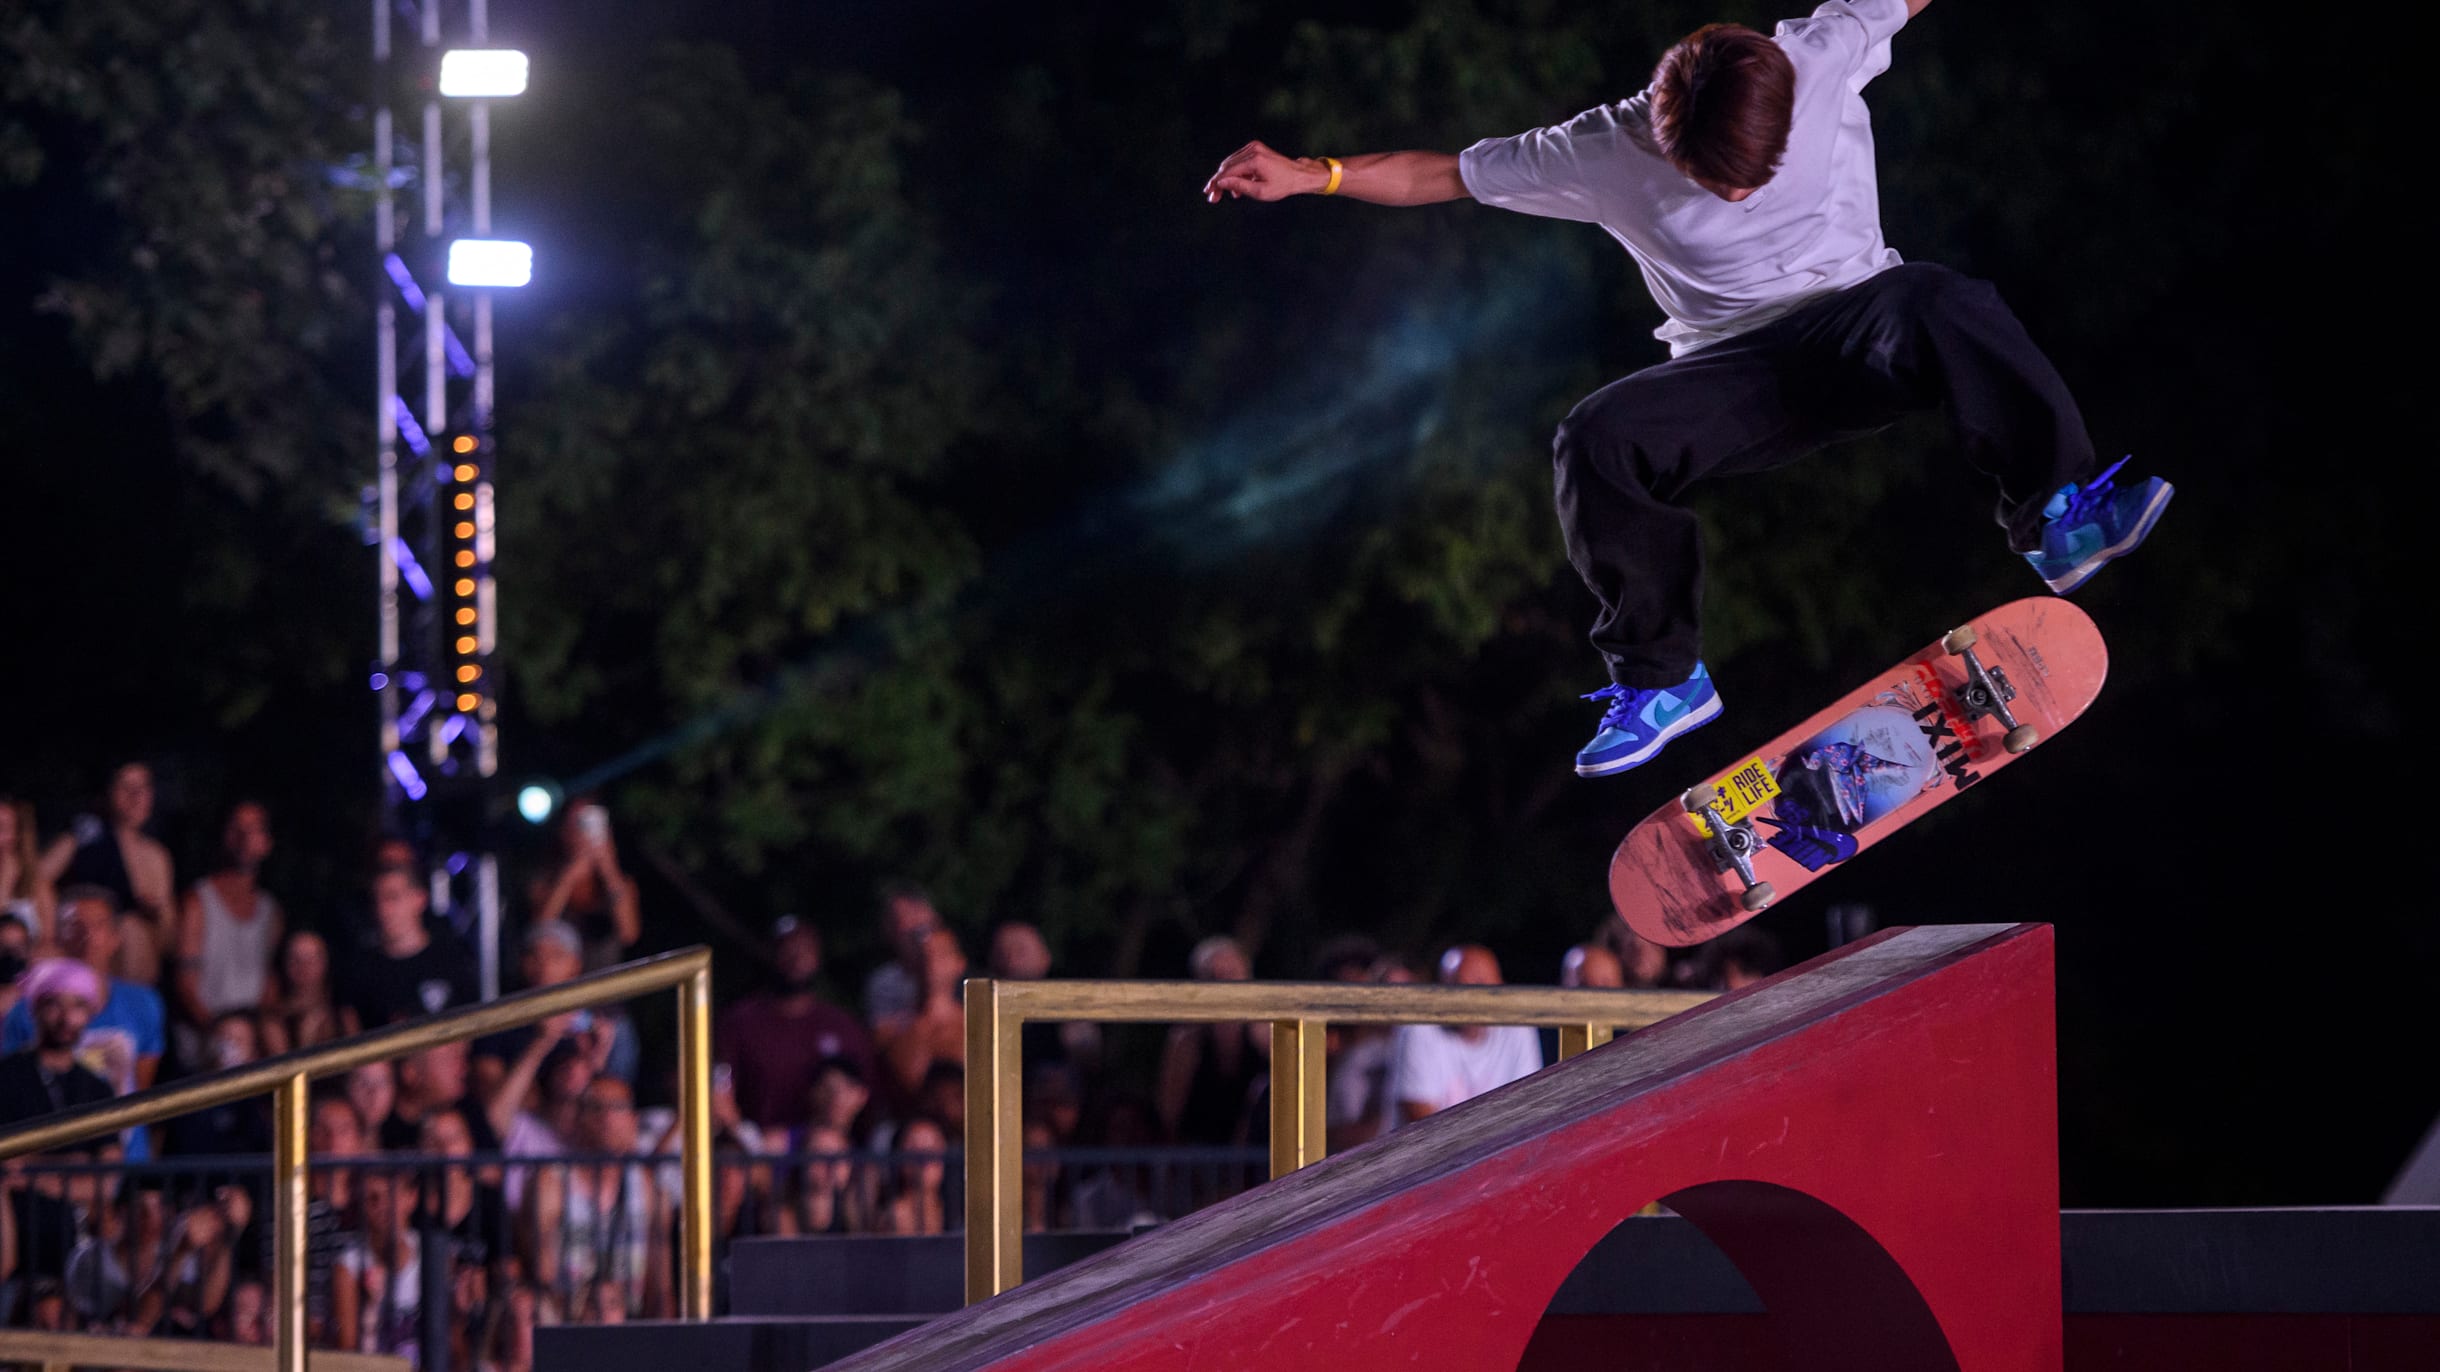 World street skateboarding championships in 2023 Preview and stars to watch at the Paris 2024 qualification event